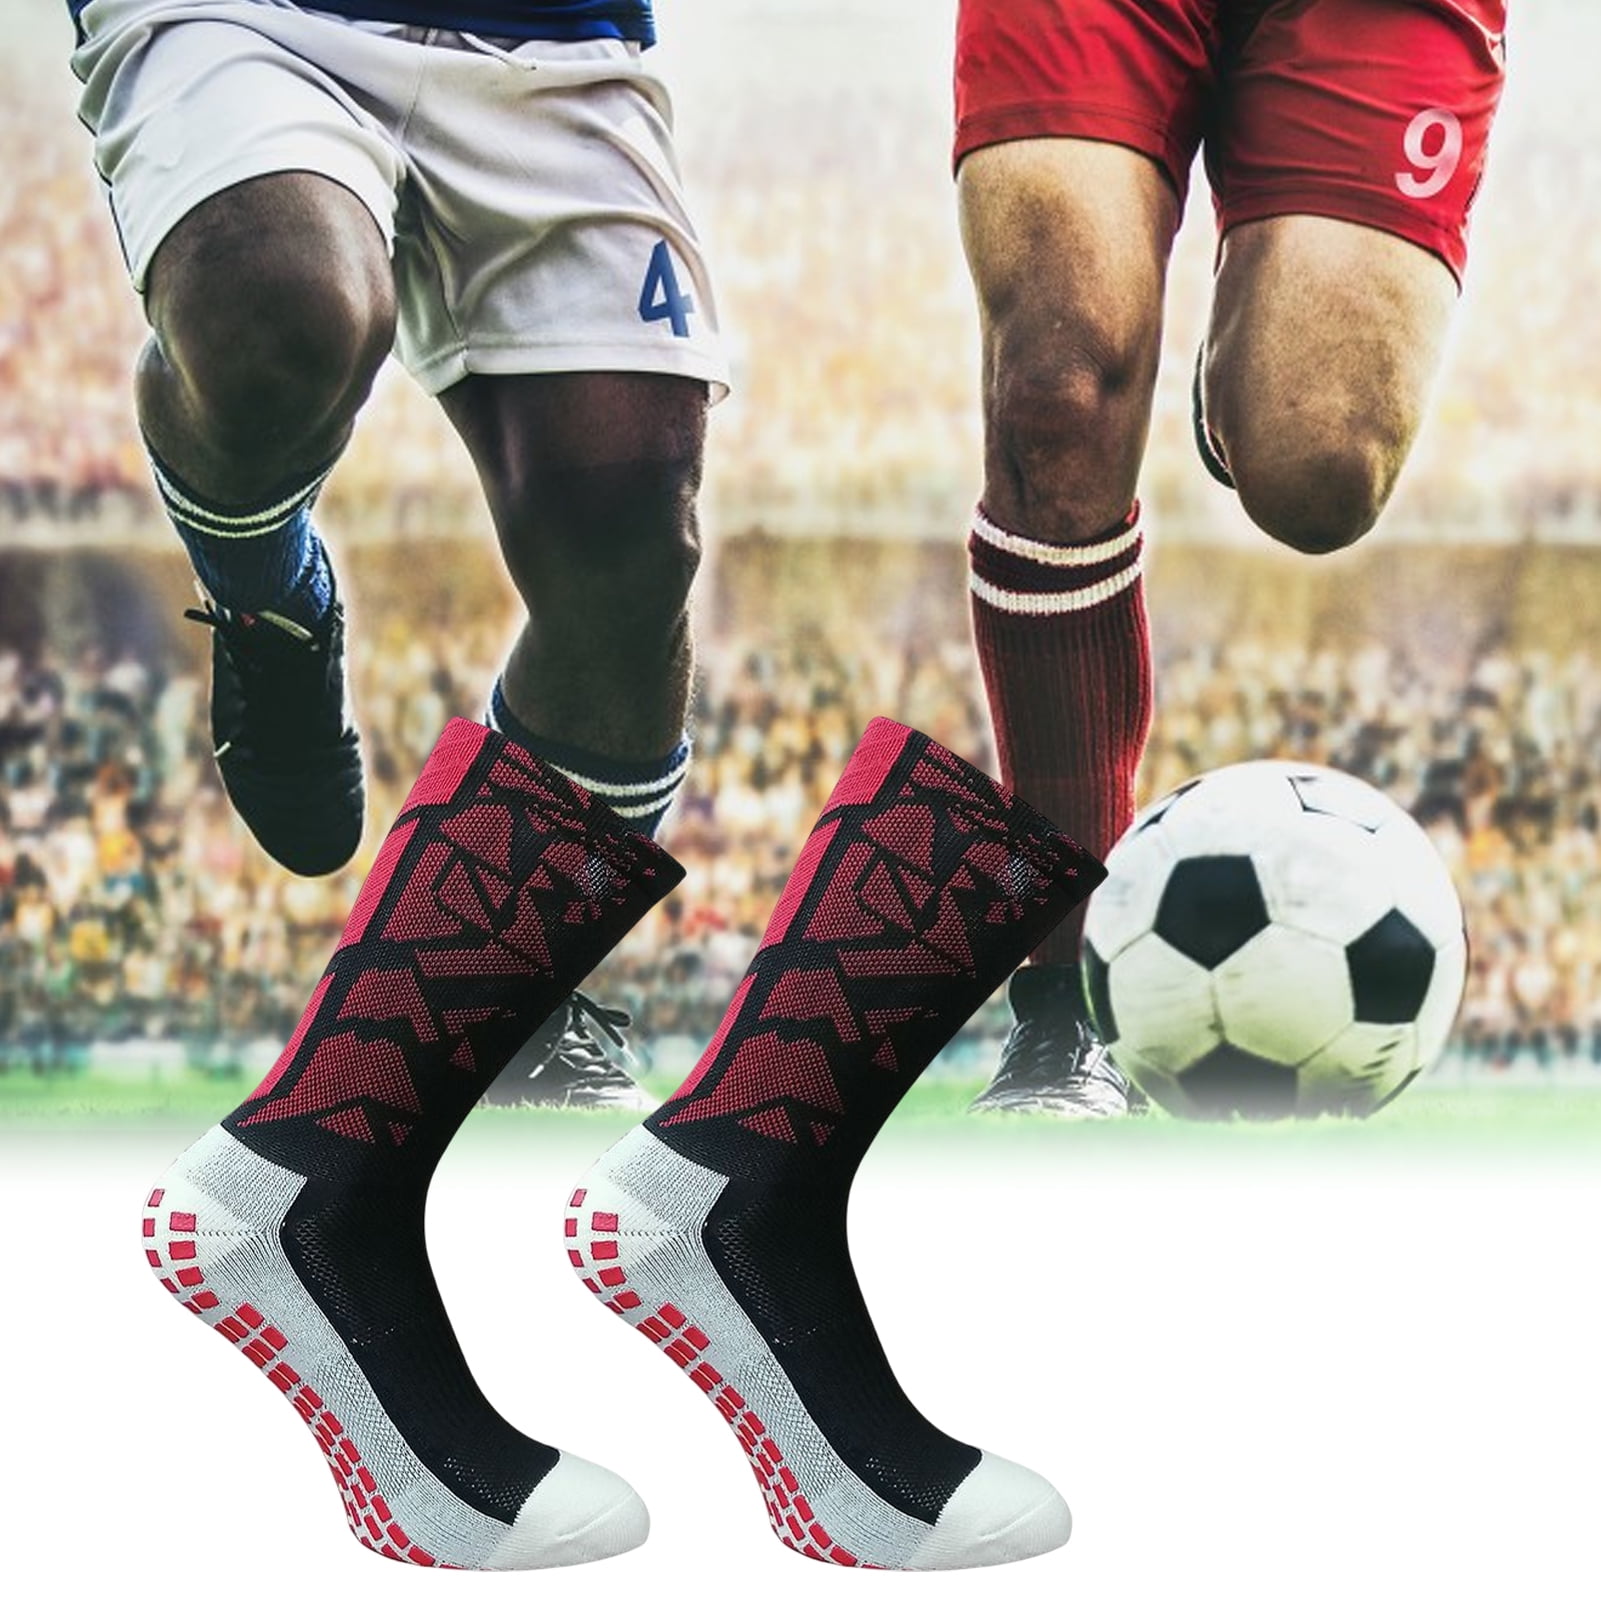 Football Compression Tube Socks Knee High Stockings Graduated Support World Cup 